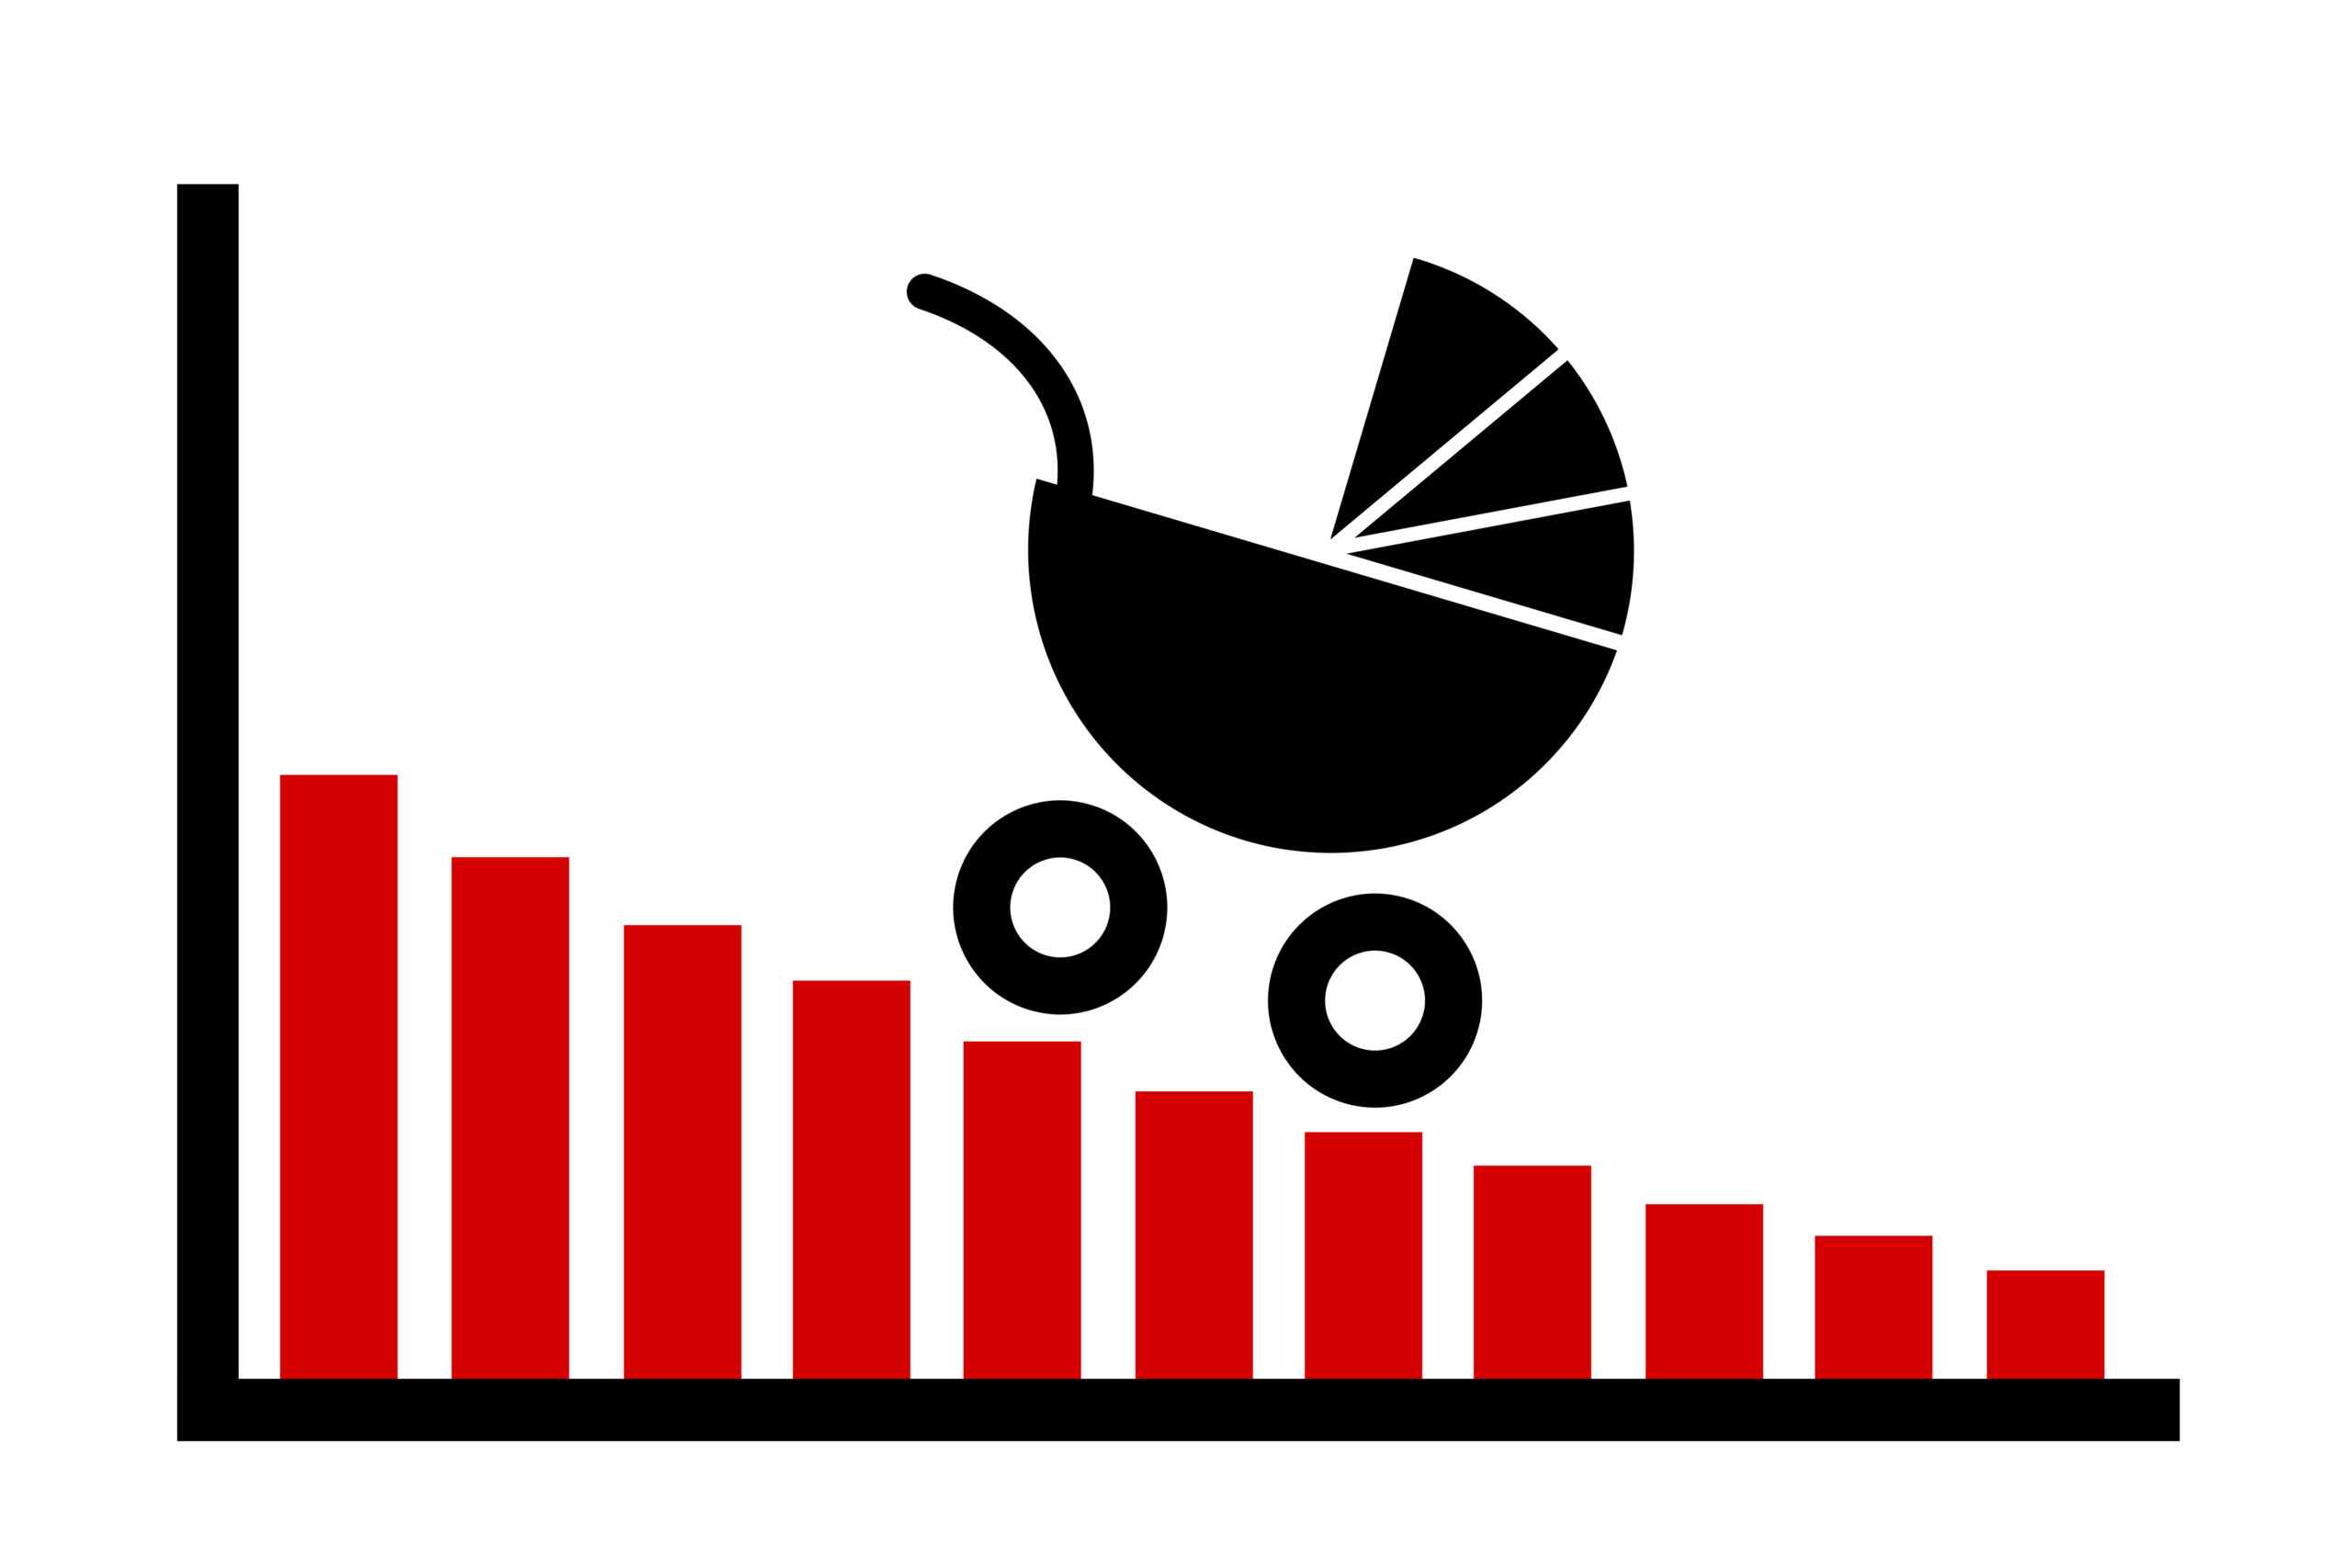 Birth rate is decreasing and declining – chart and graph of low and negative fertility rate. Population and natality social problem . Vector illustration